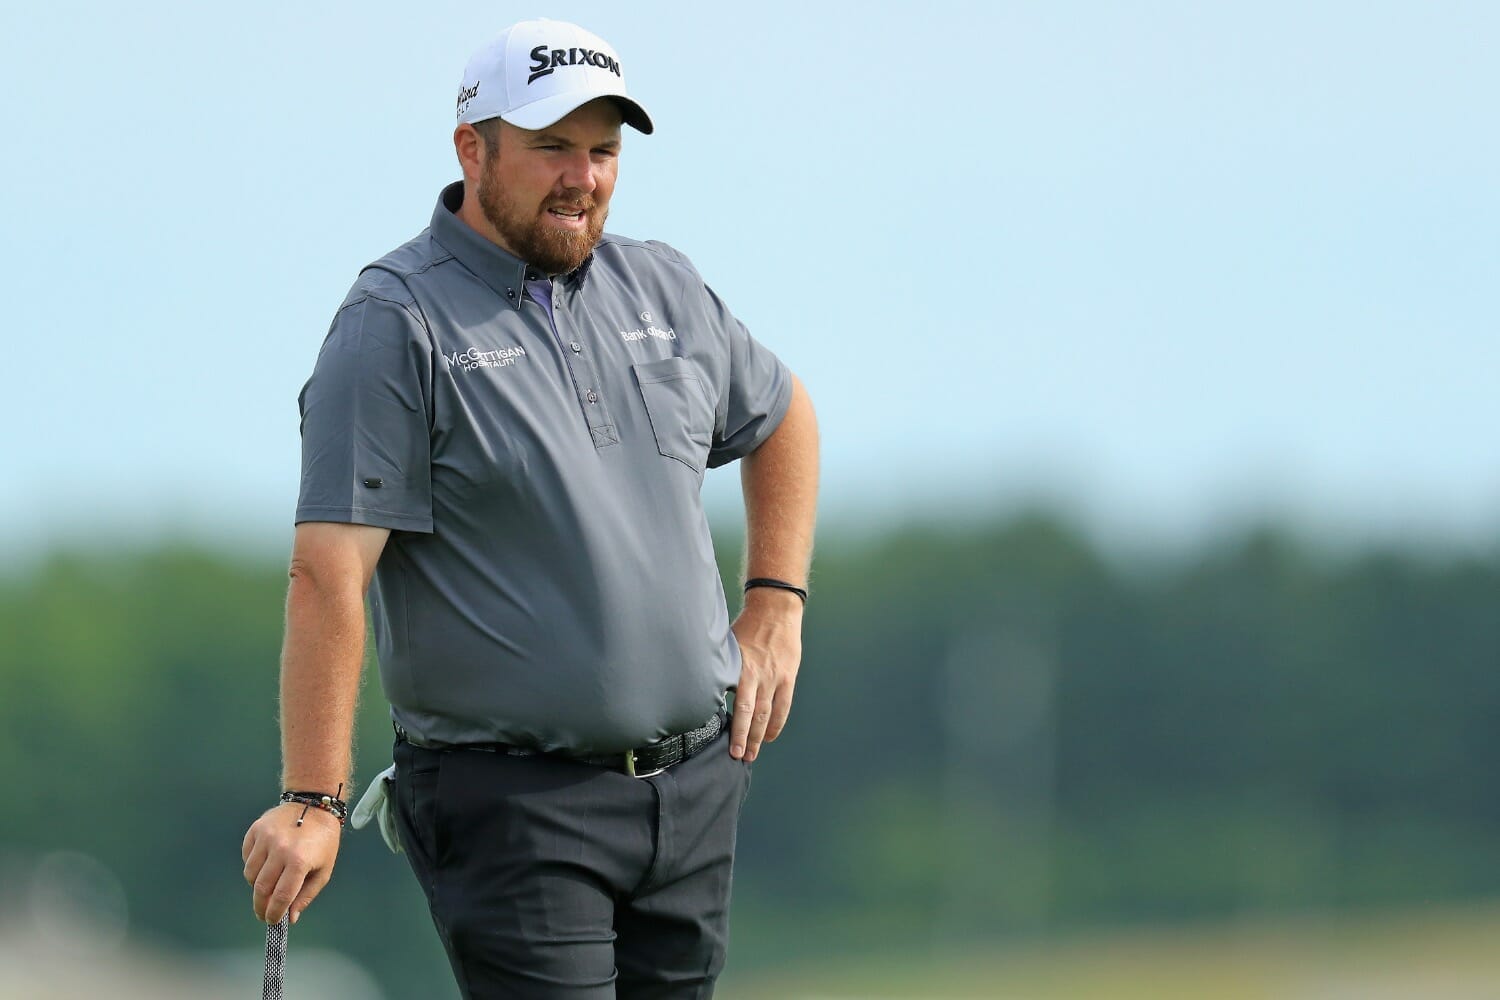 Some bookie bashing tips for the Wyndham Championship